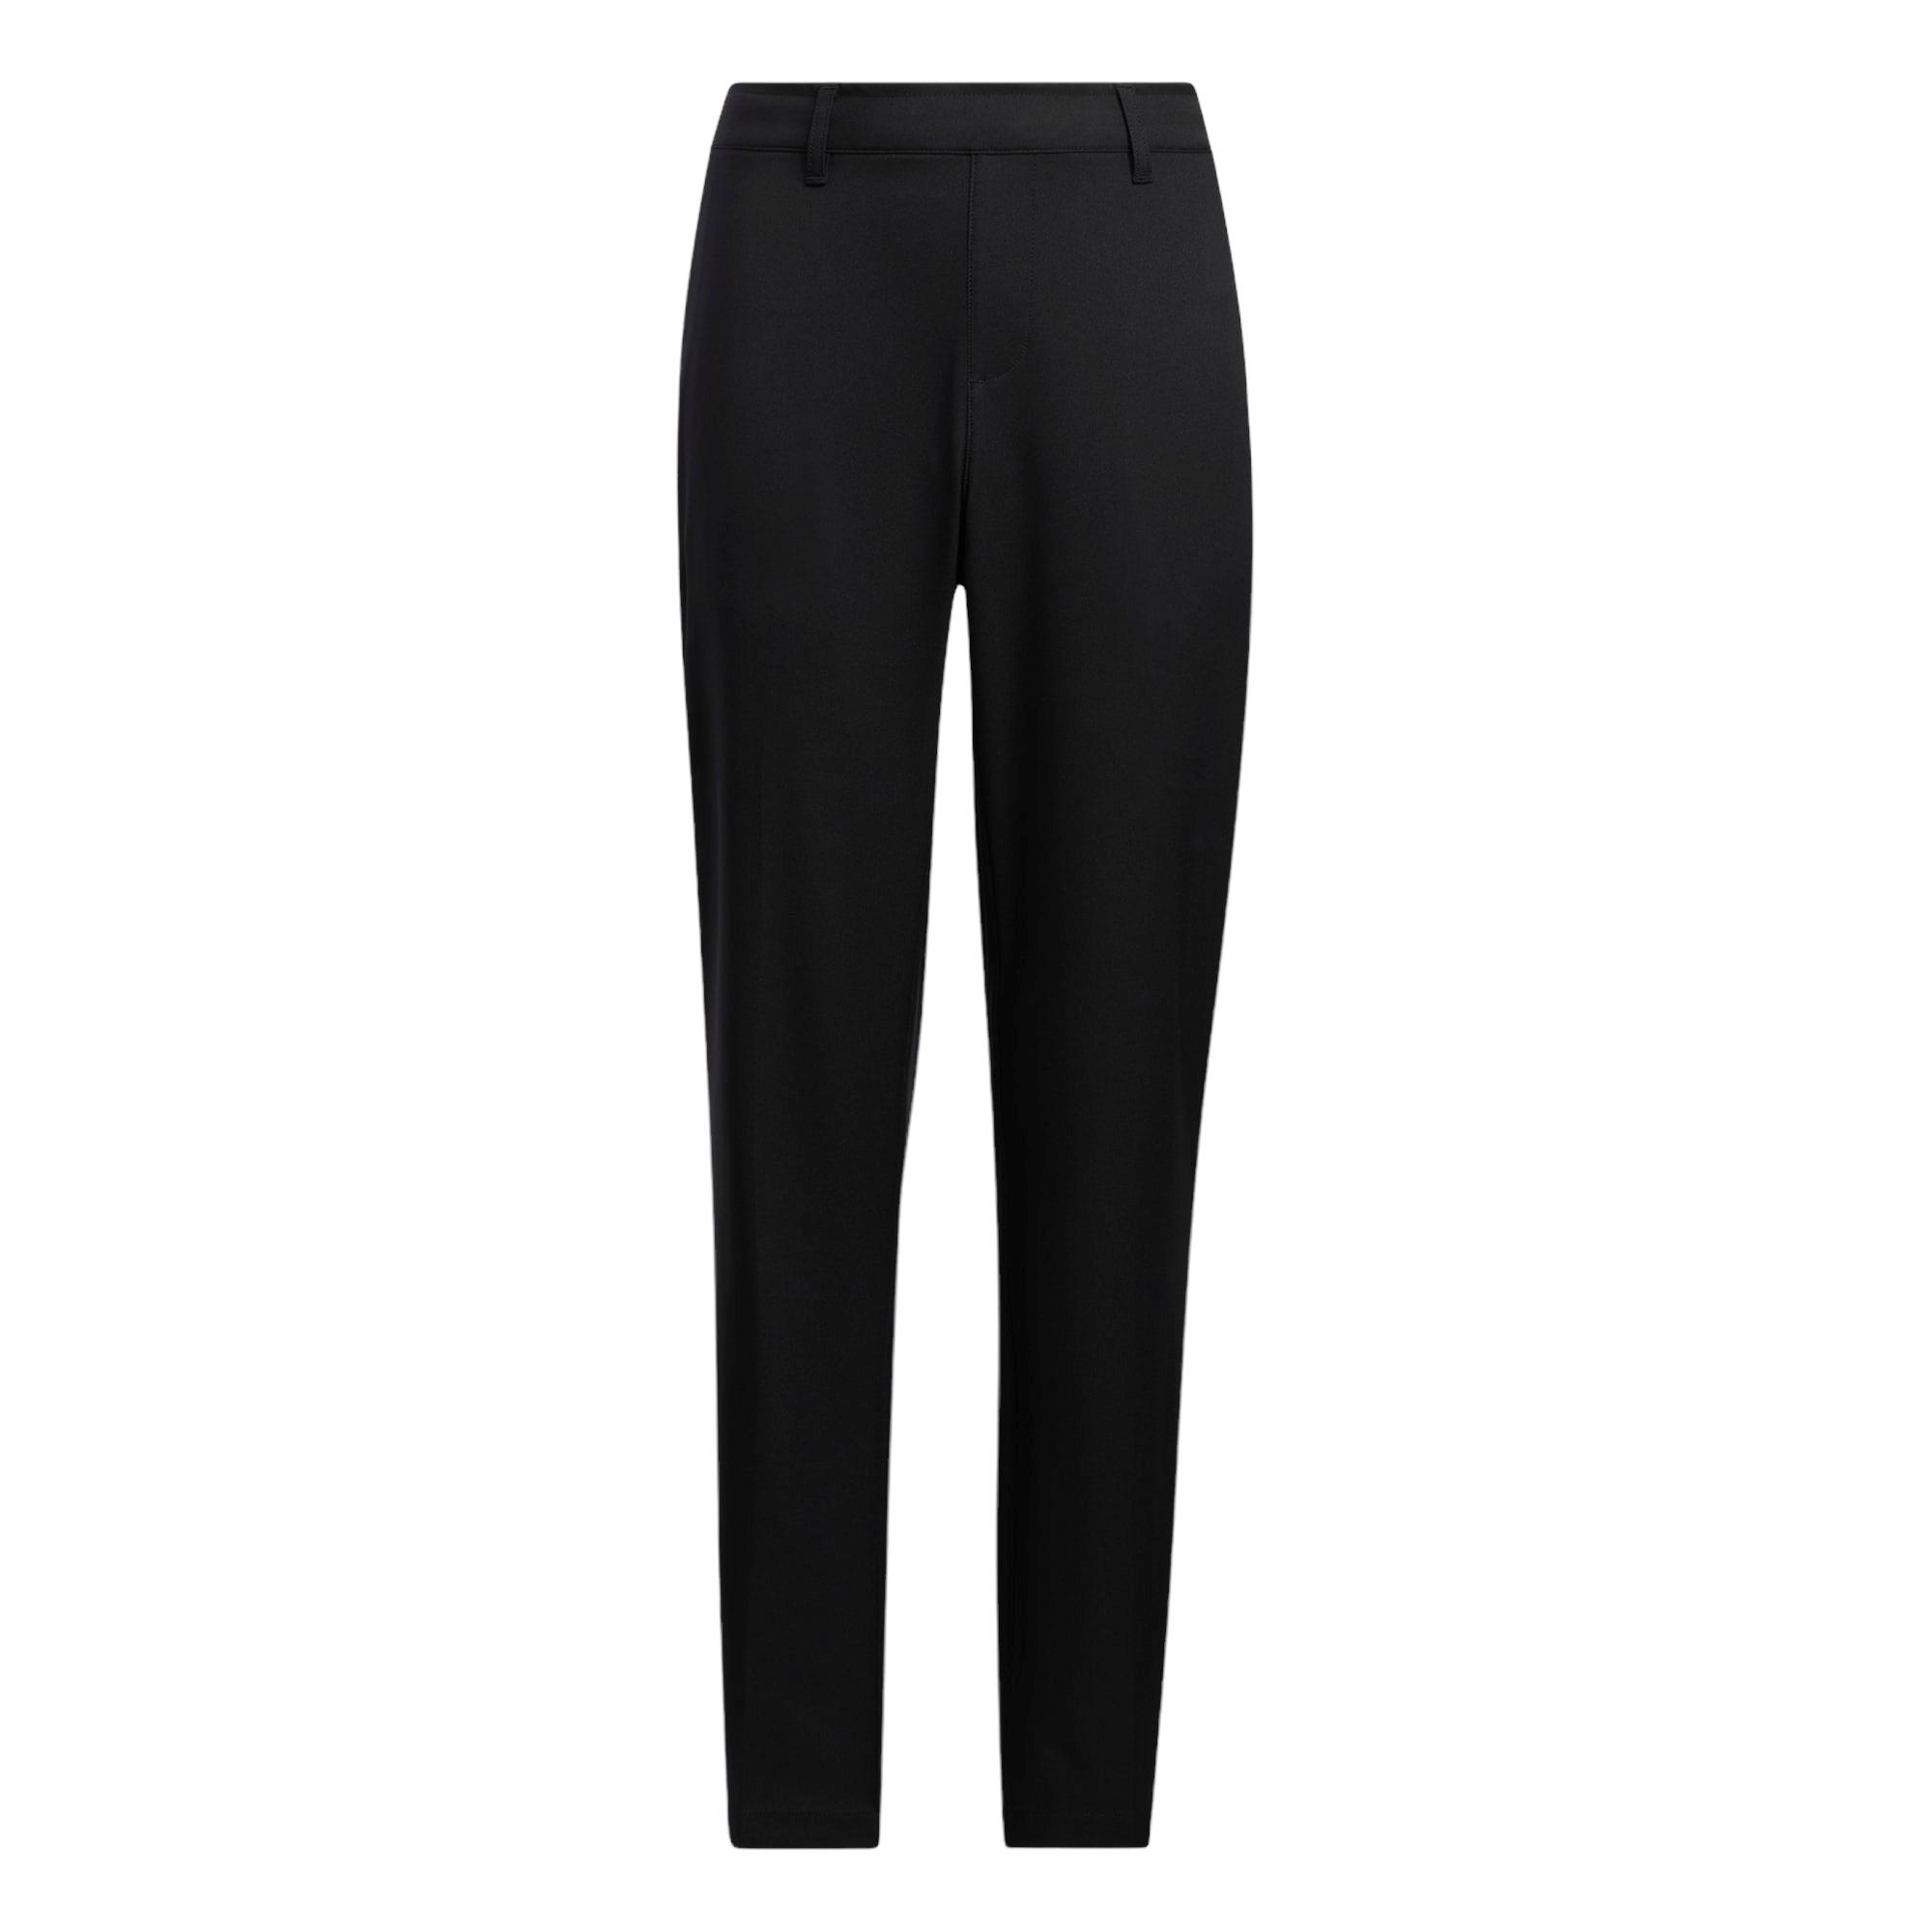 adidas Golf Trousers - Go To Fall Weight Pant - Crew Navy AW22